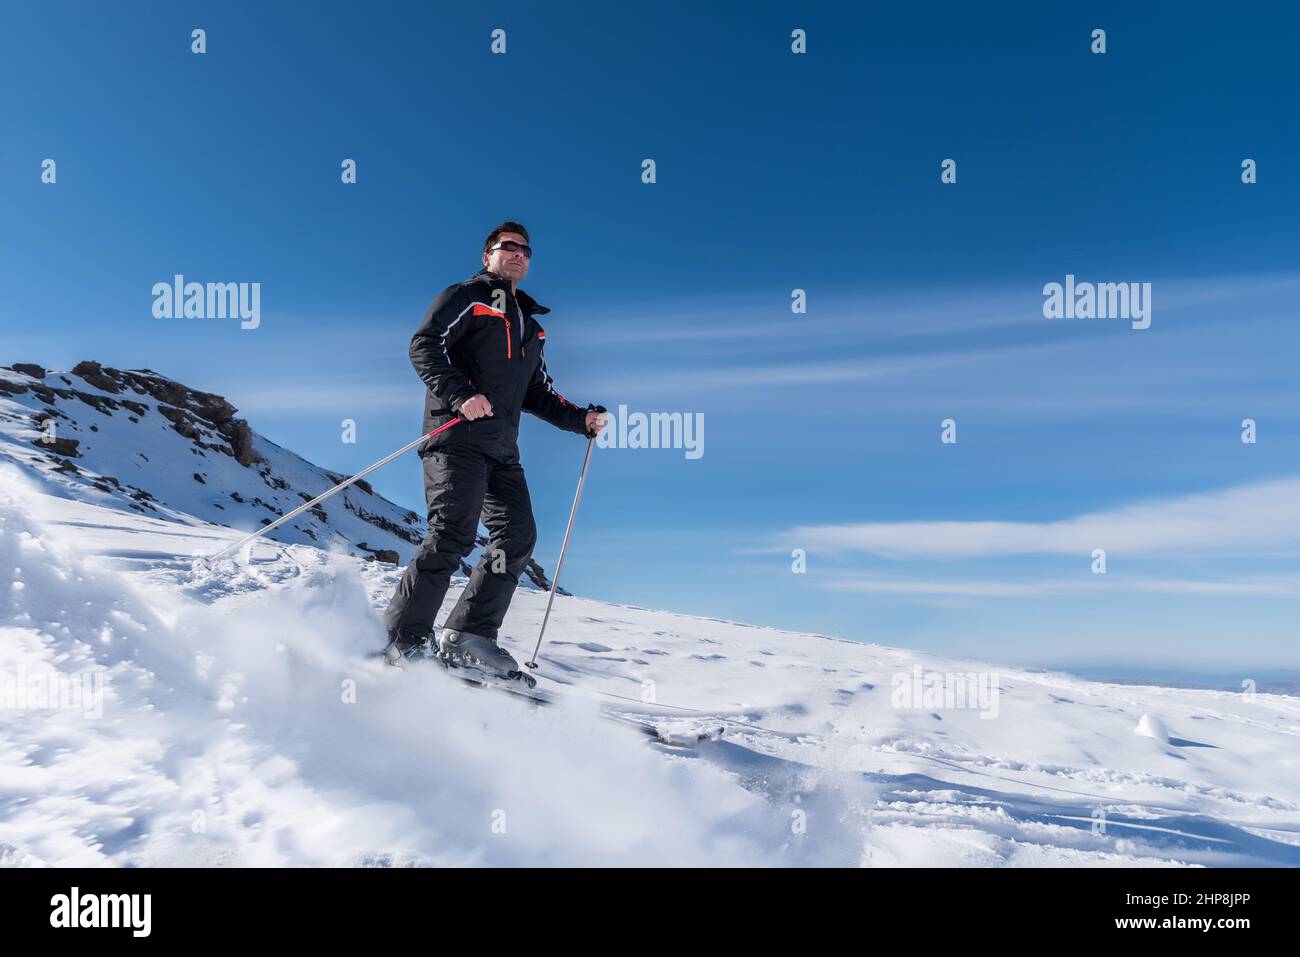 Boy Sliding Down Snow Slope High-Res Stock Photo - Getty Images